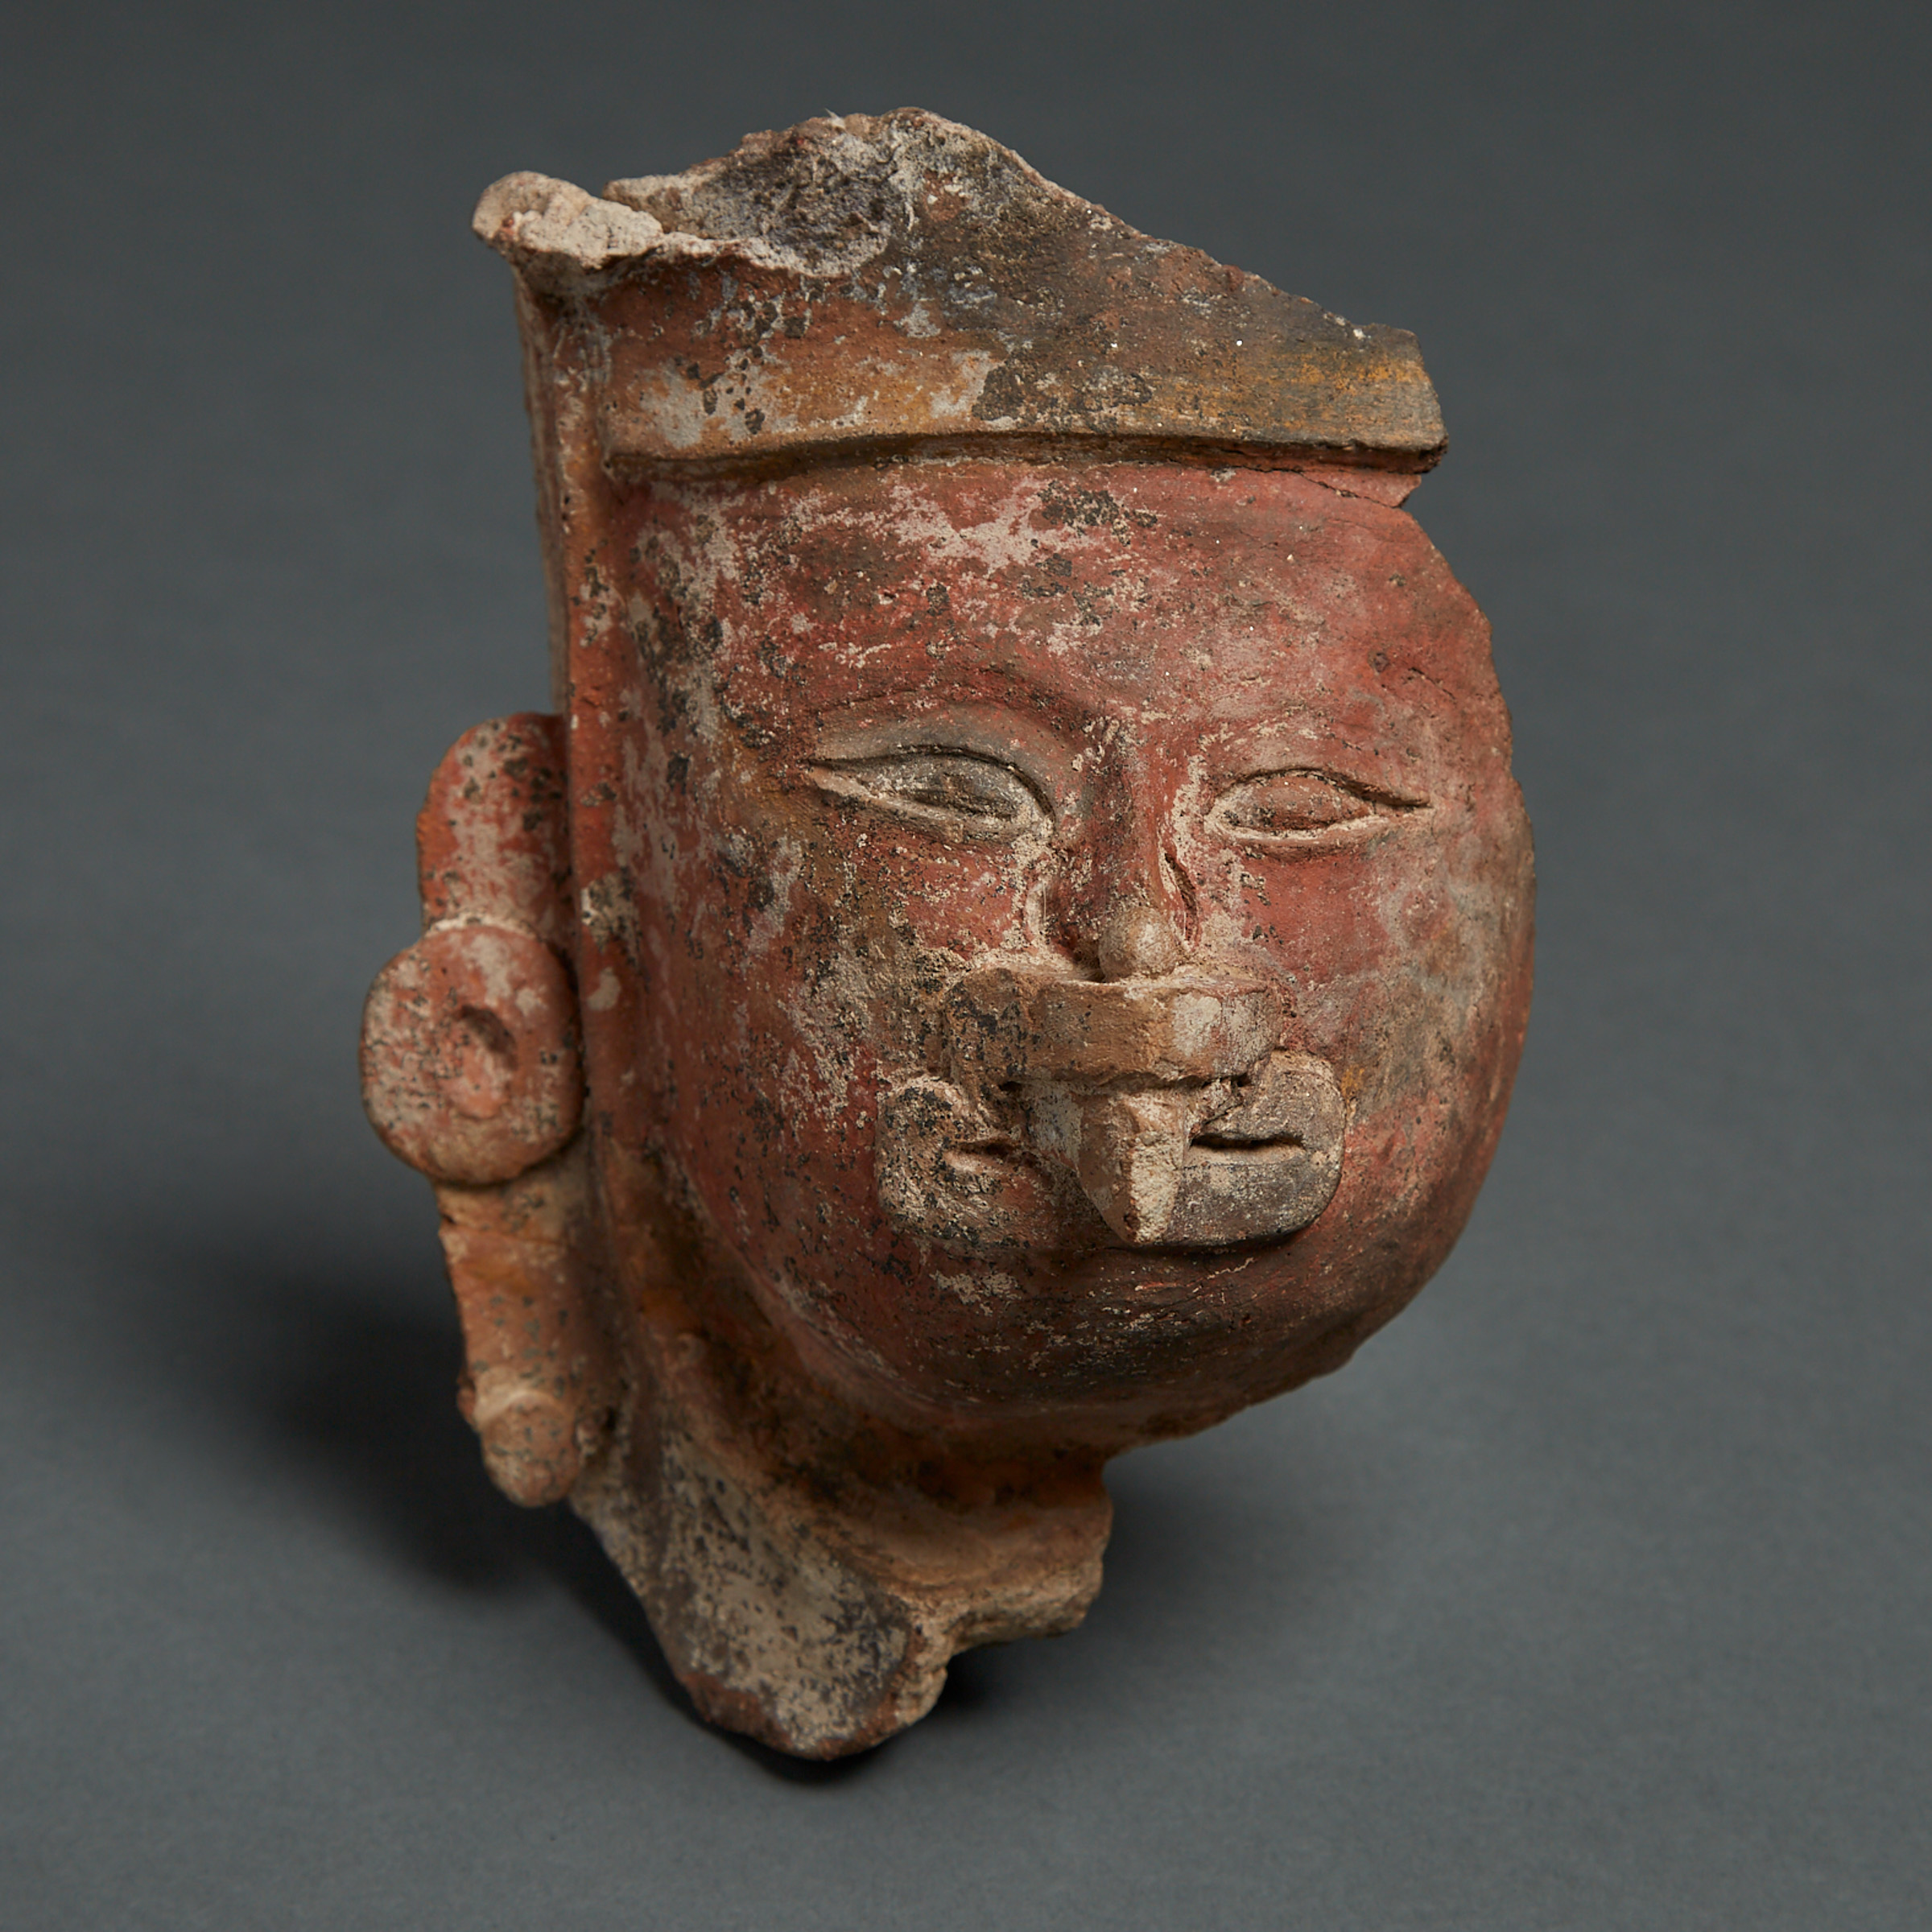 Zapotec Polychromed Pottery Urn Mask Fragment, Monte Alban, Early Classic Period, 300-600 A.D.